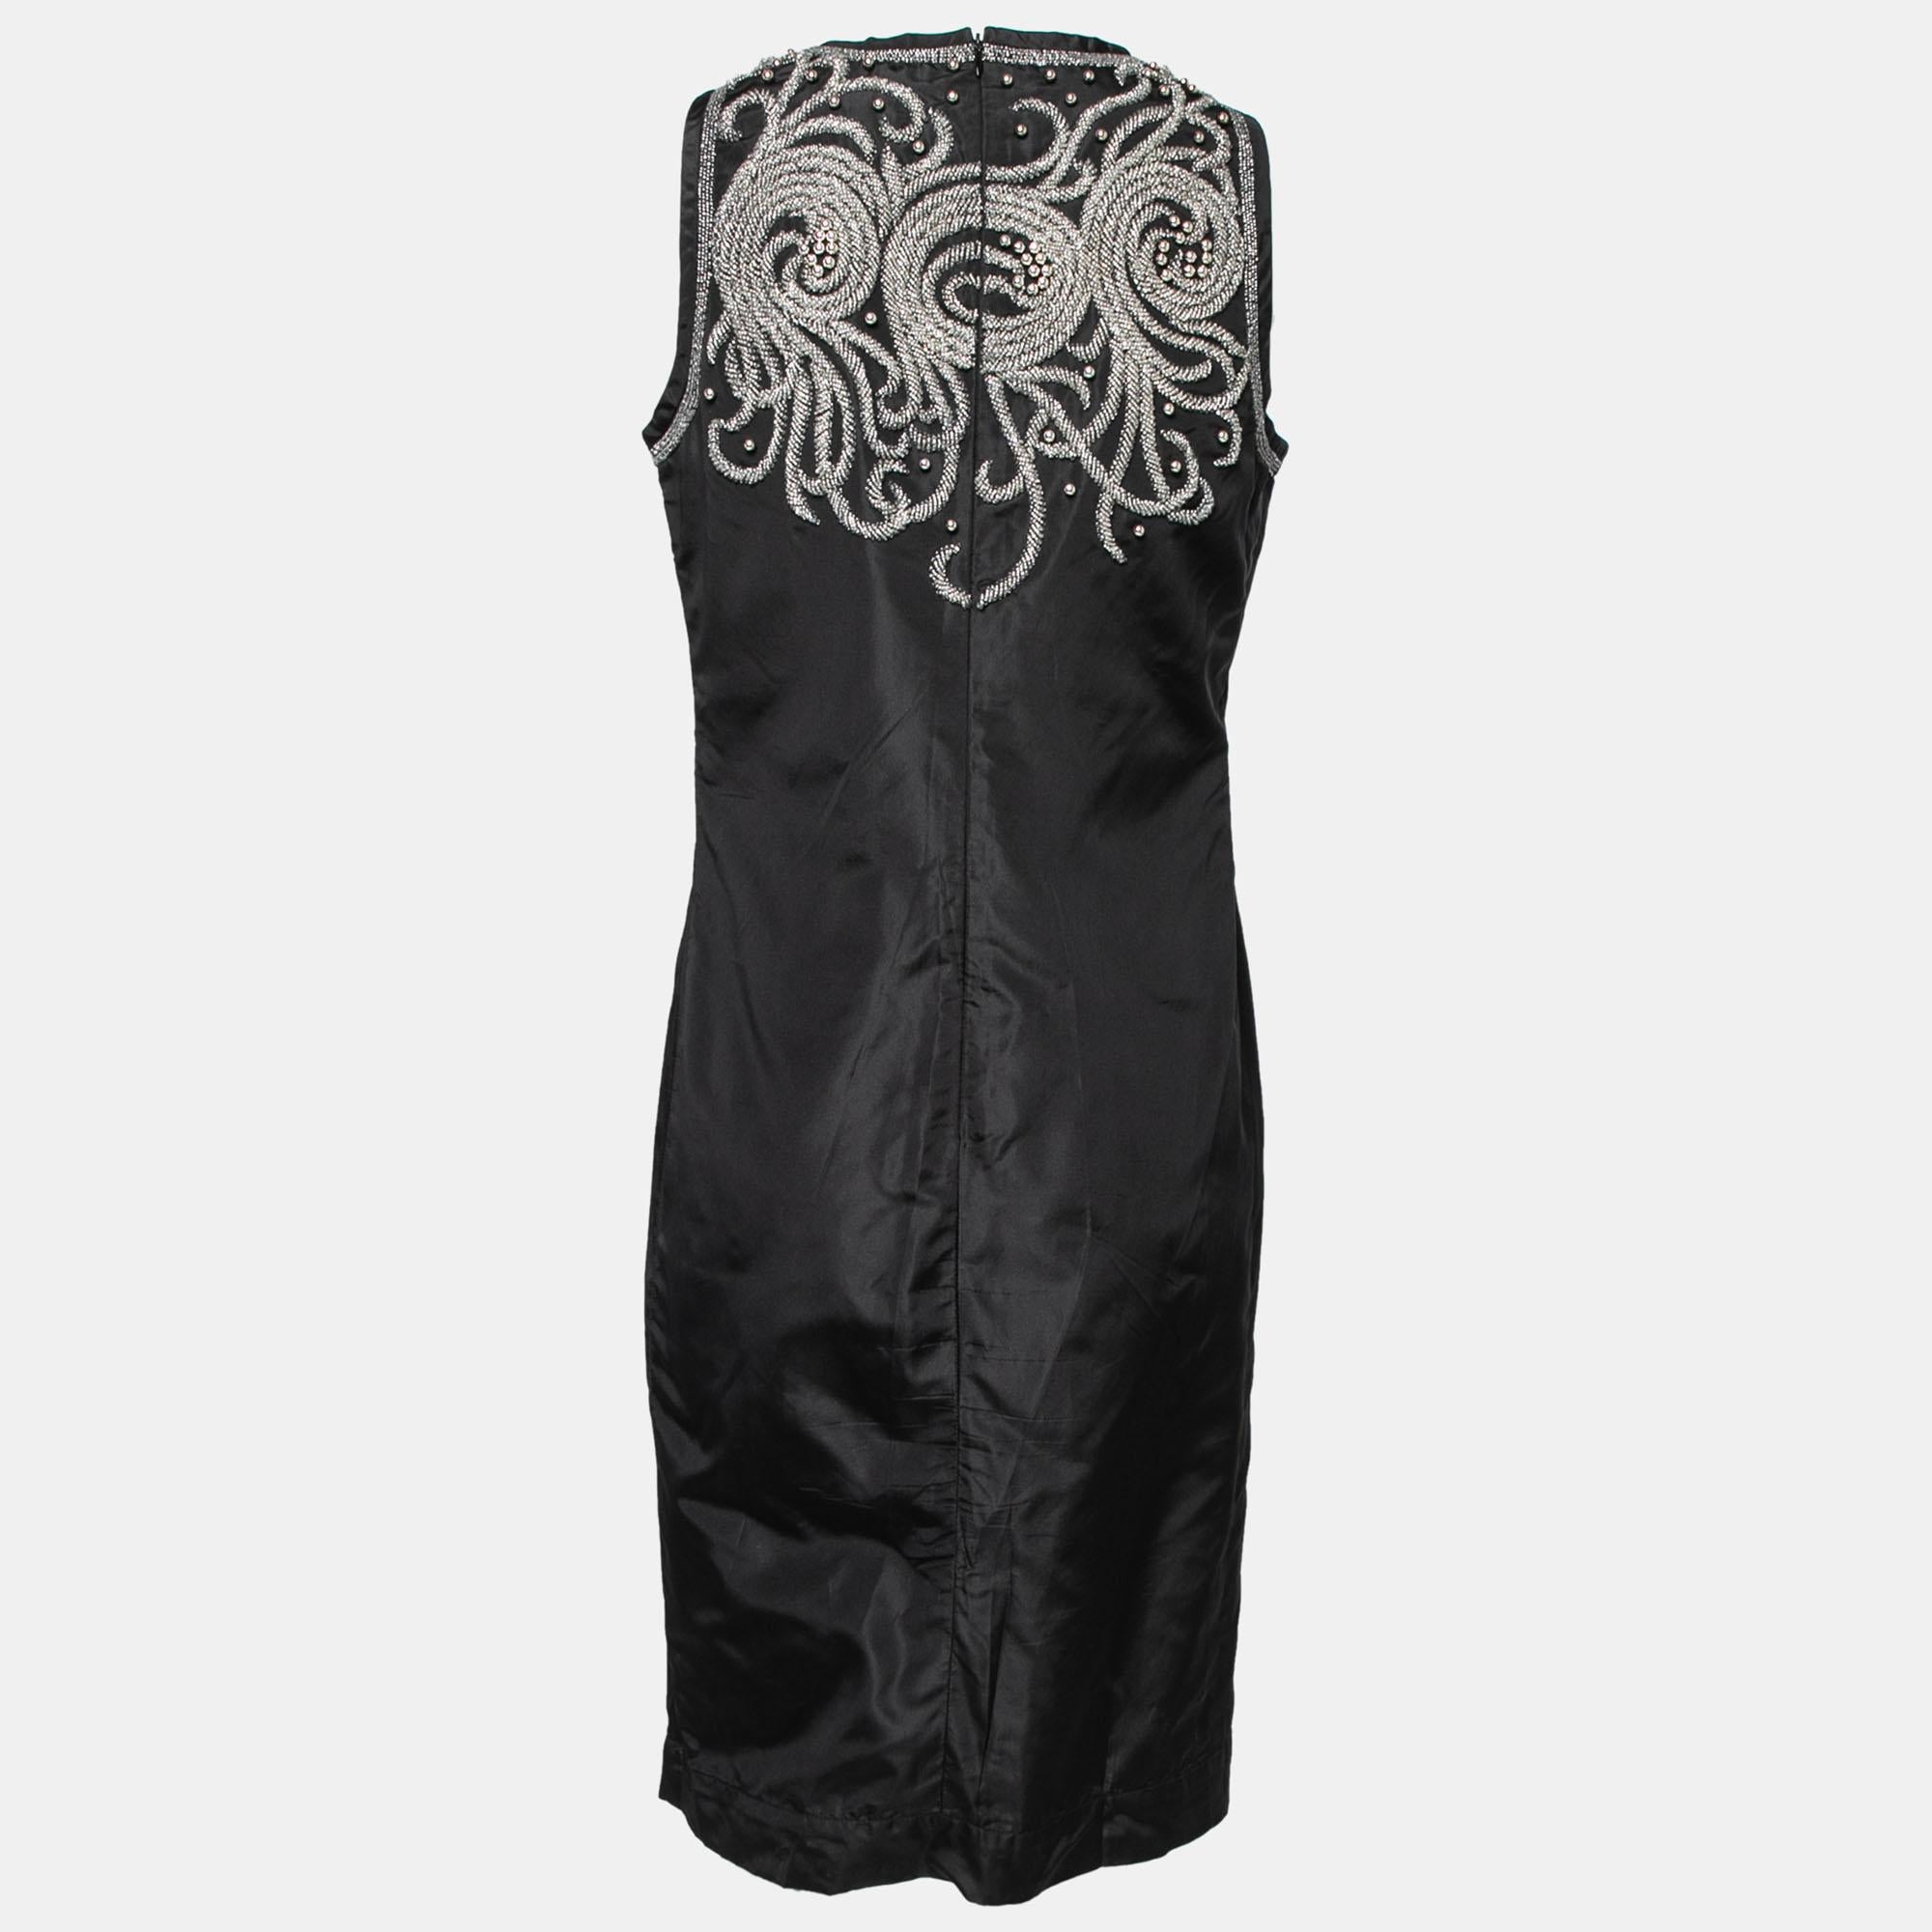 This dress from Balenciaga is so pretty, you'll love wearing it. The fabulous creation is made of silk and features an elegant design with bead embellishments on the top front and back along with a sleeveless style. Pair it with strappy sandals for